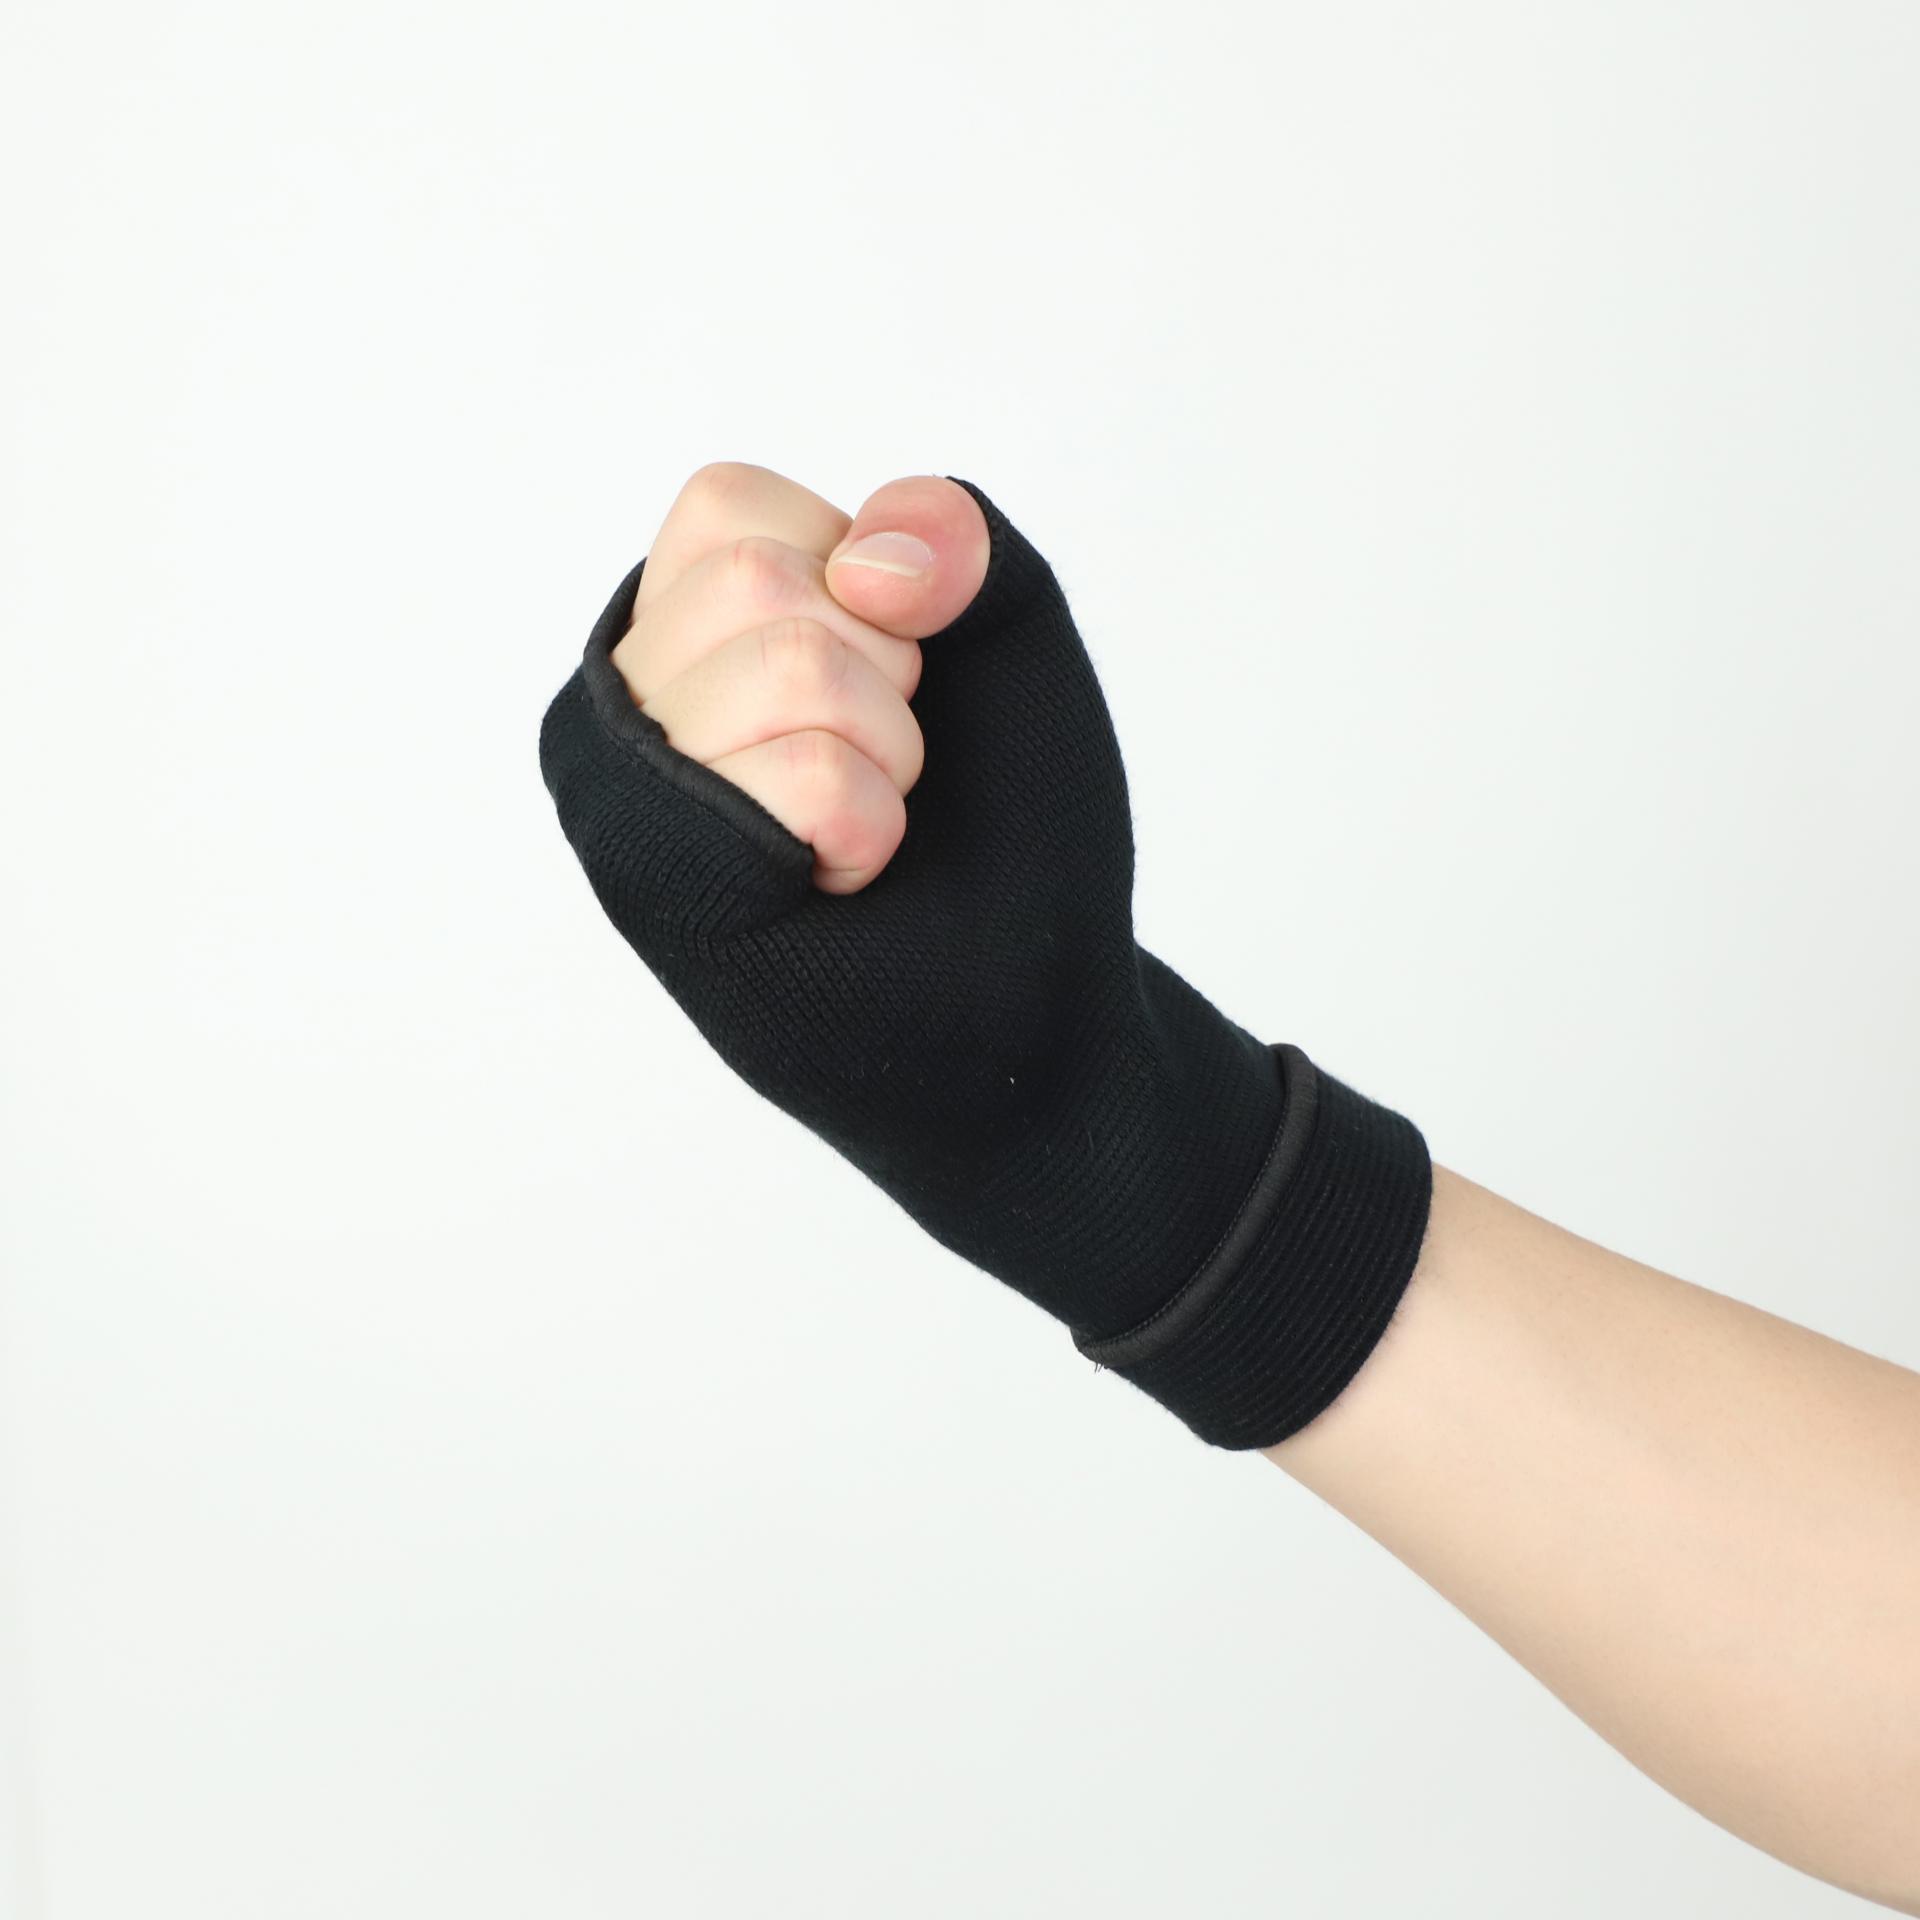 Knitted Hand Wraps for Men and Women Workouts Compression for Basketball Running and More